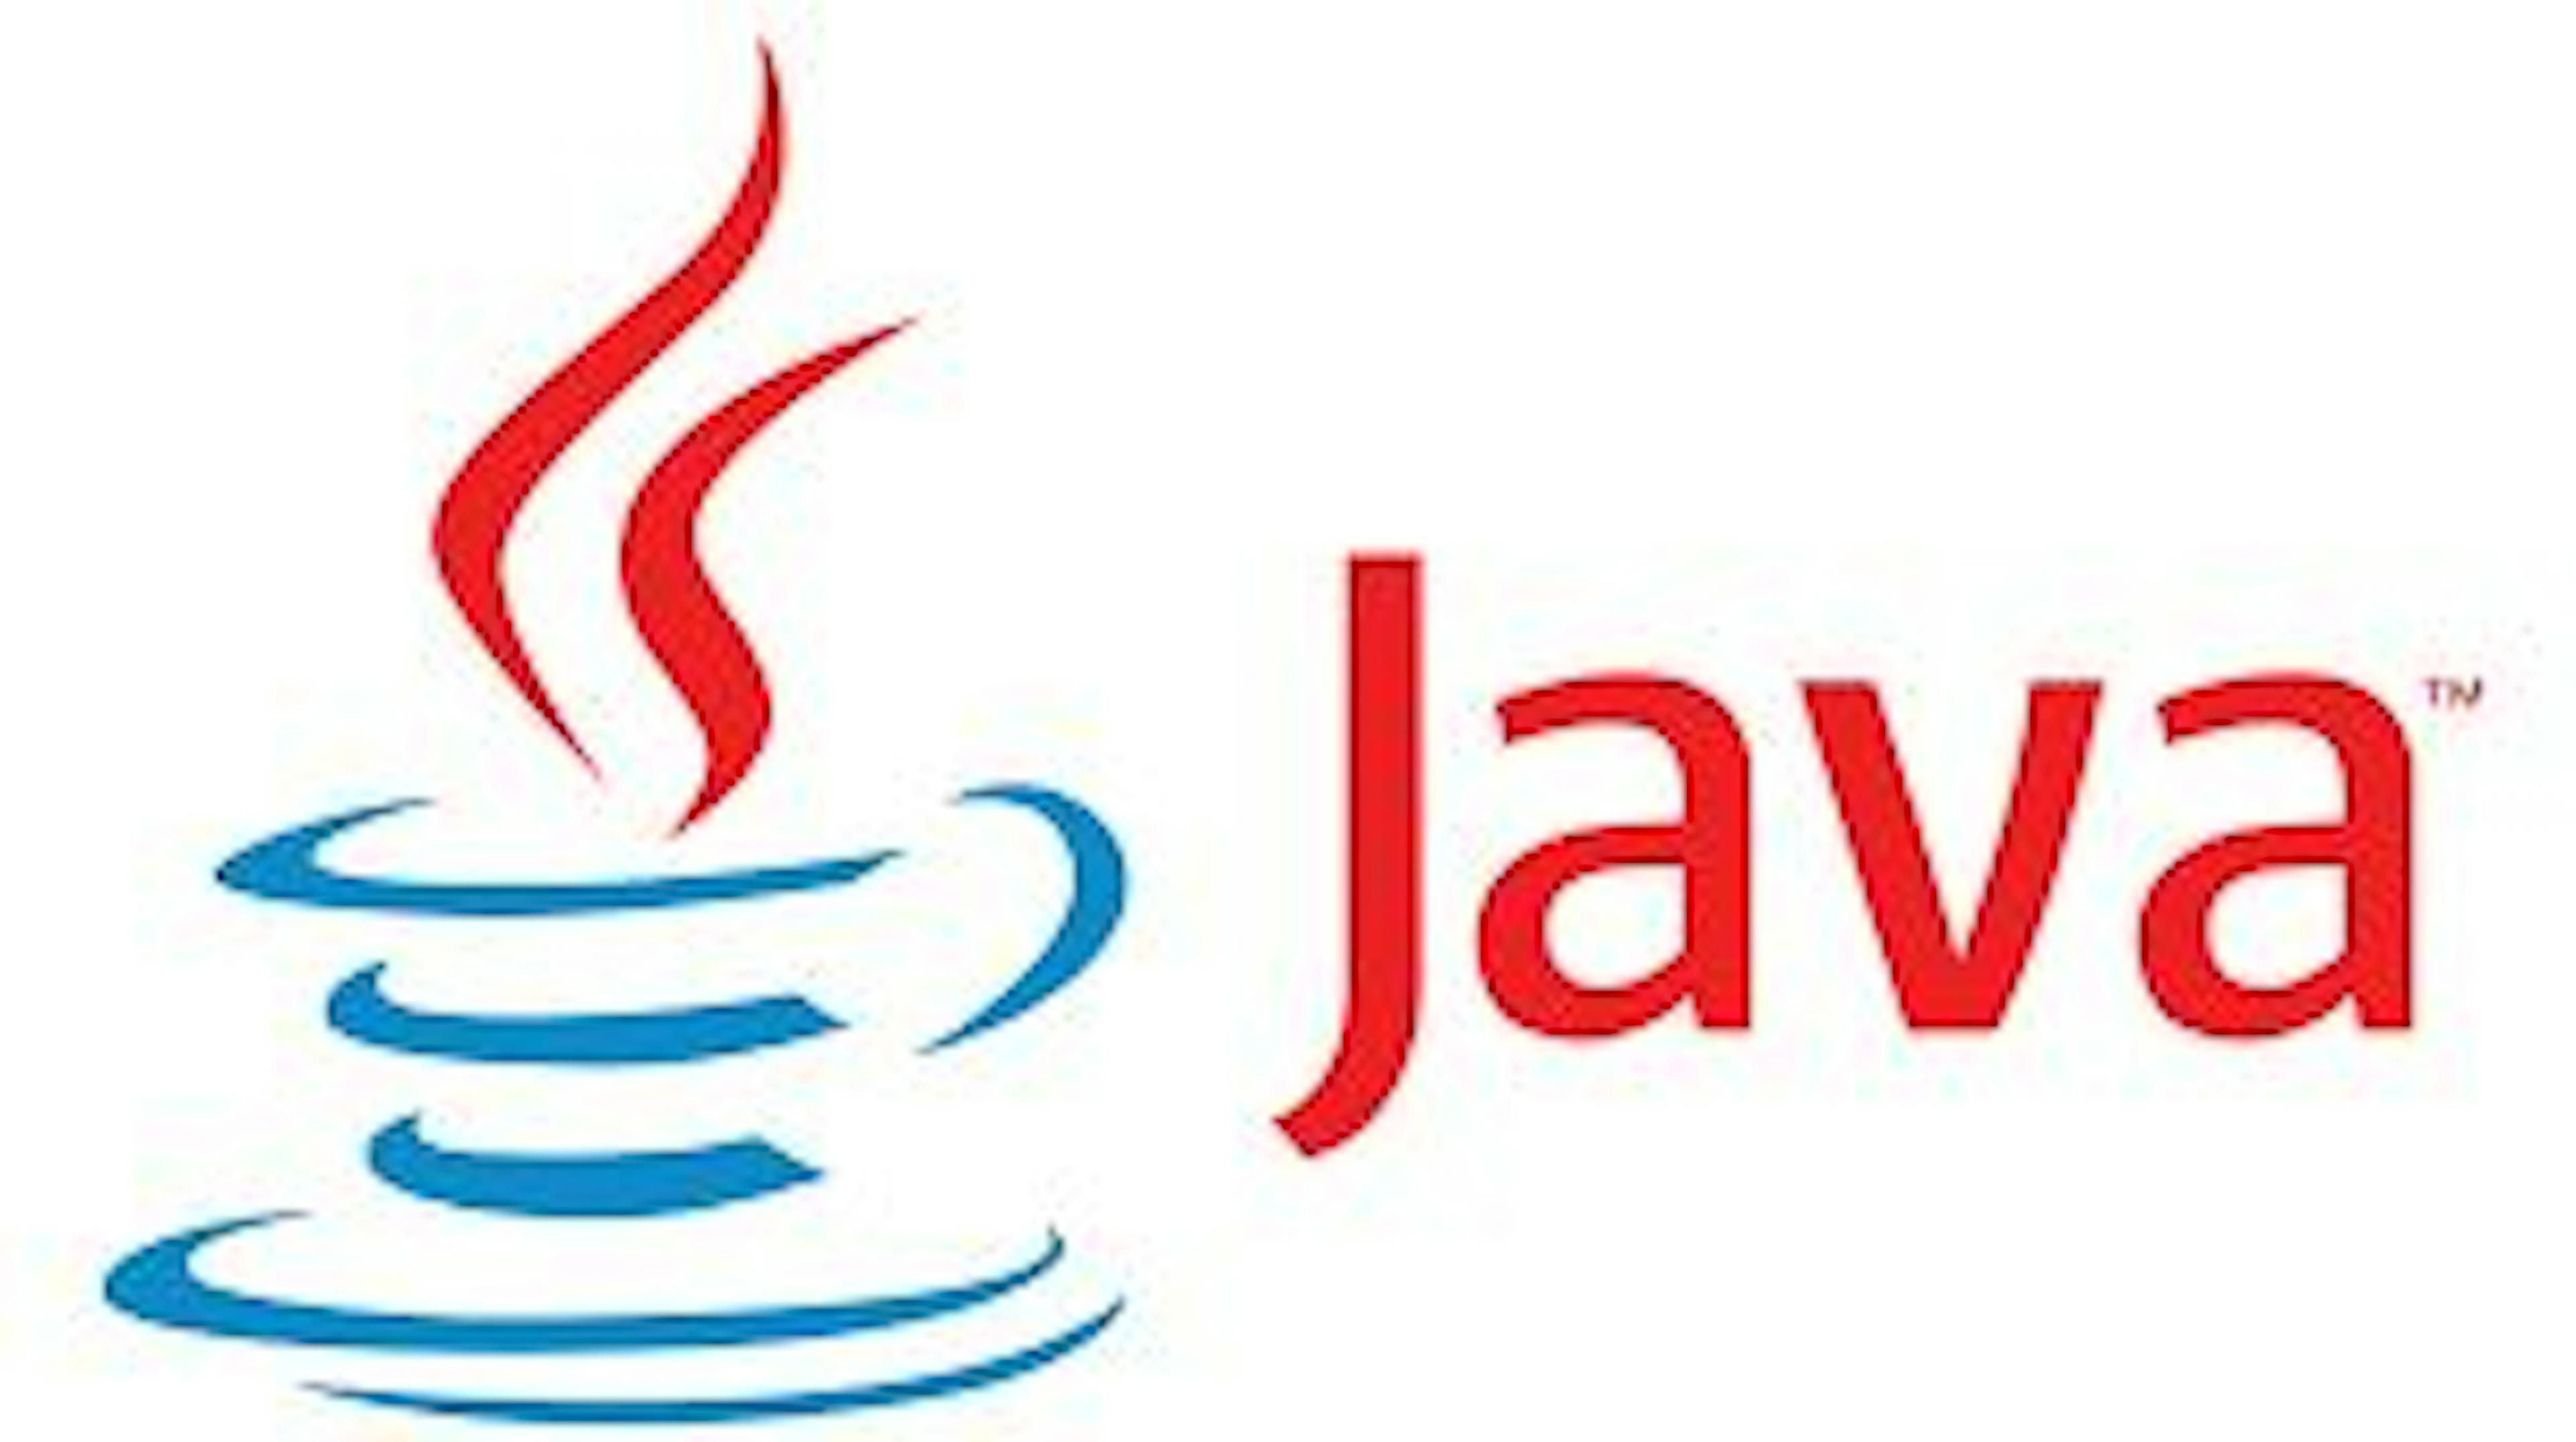 /command-line-arguments-in-java-for-beginners-p21233y9 feature image